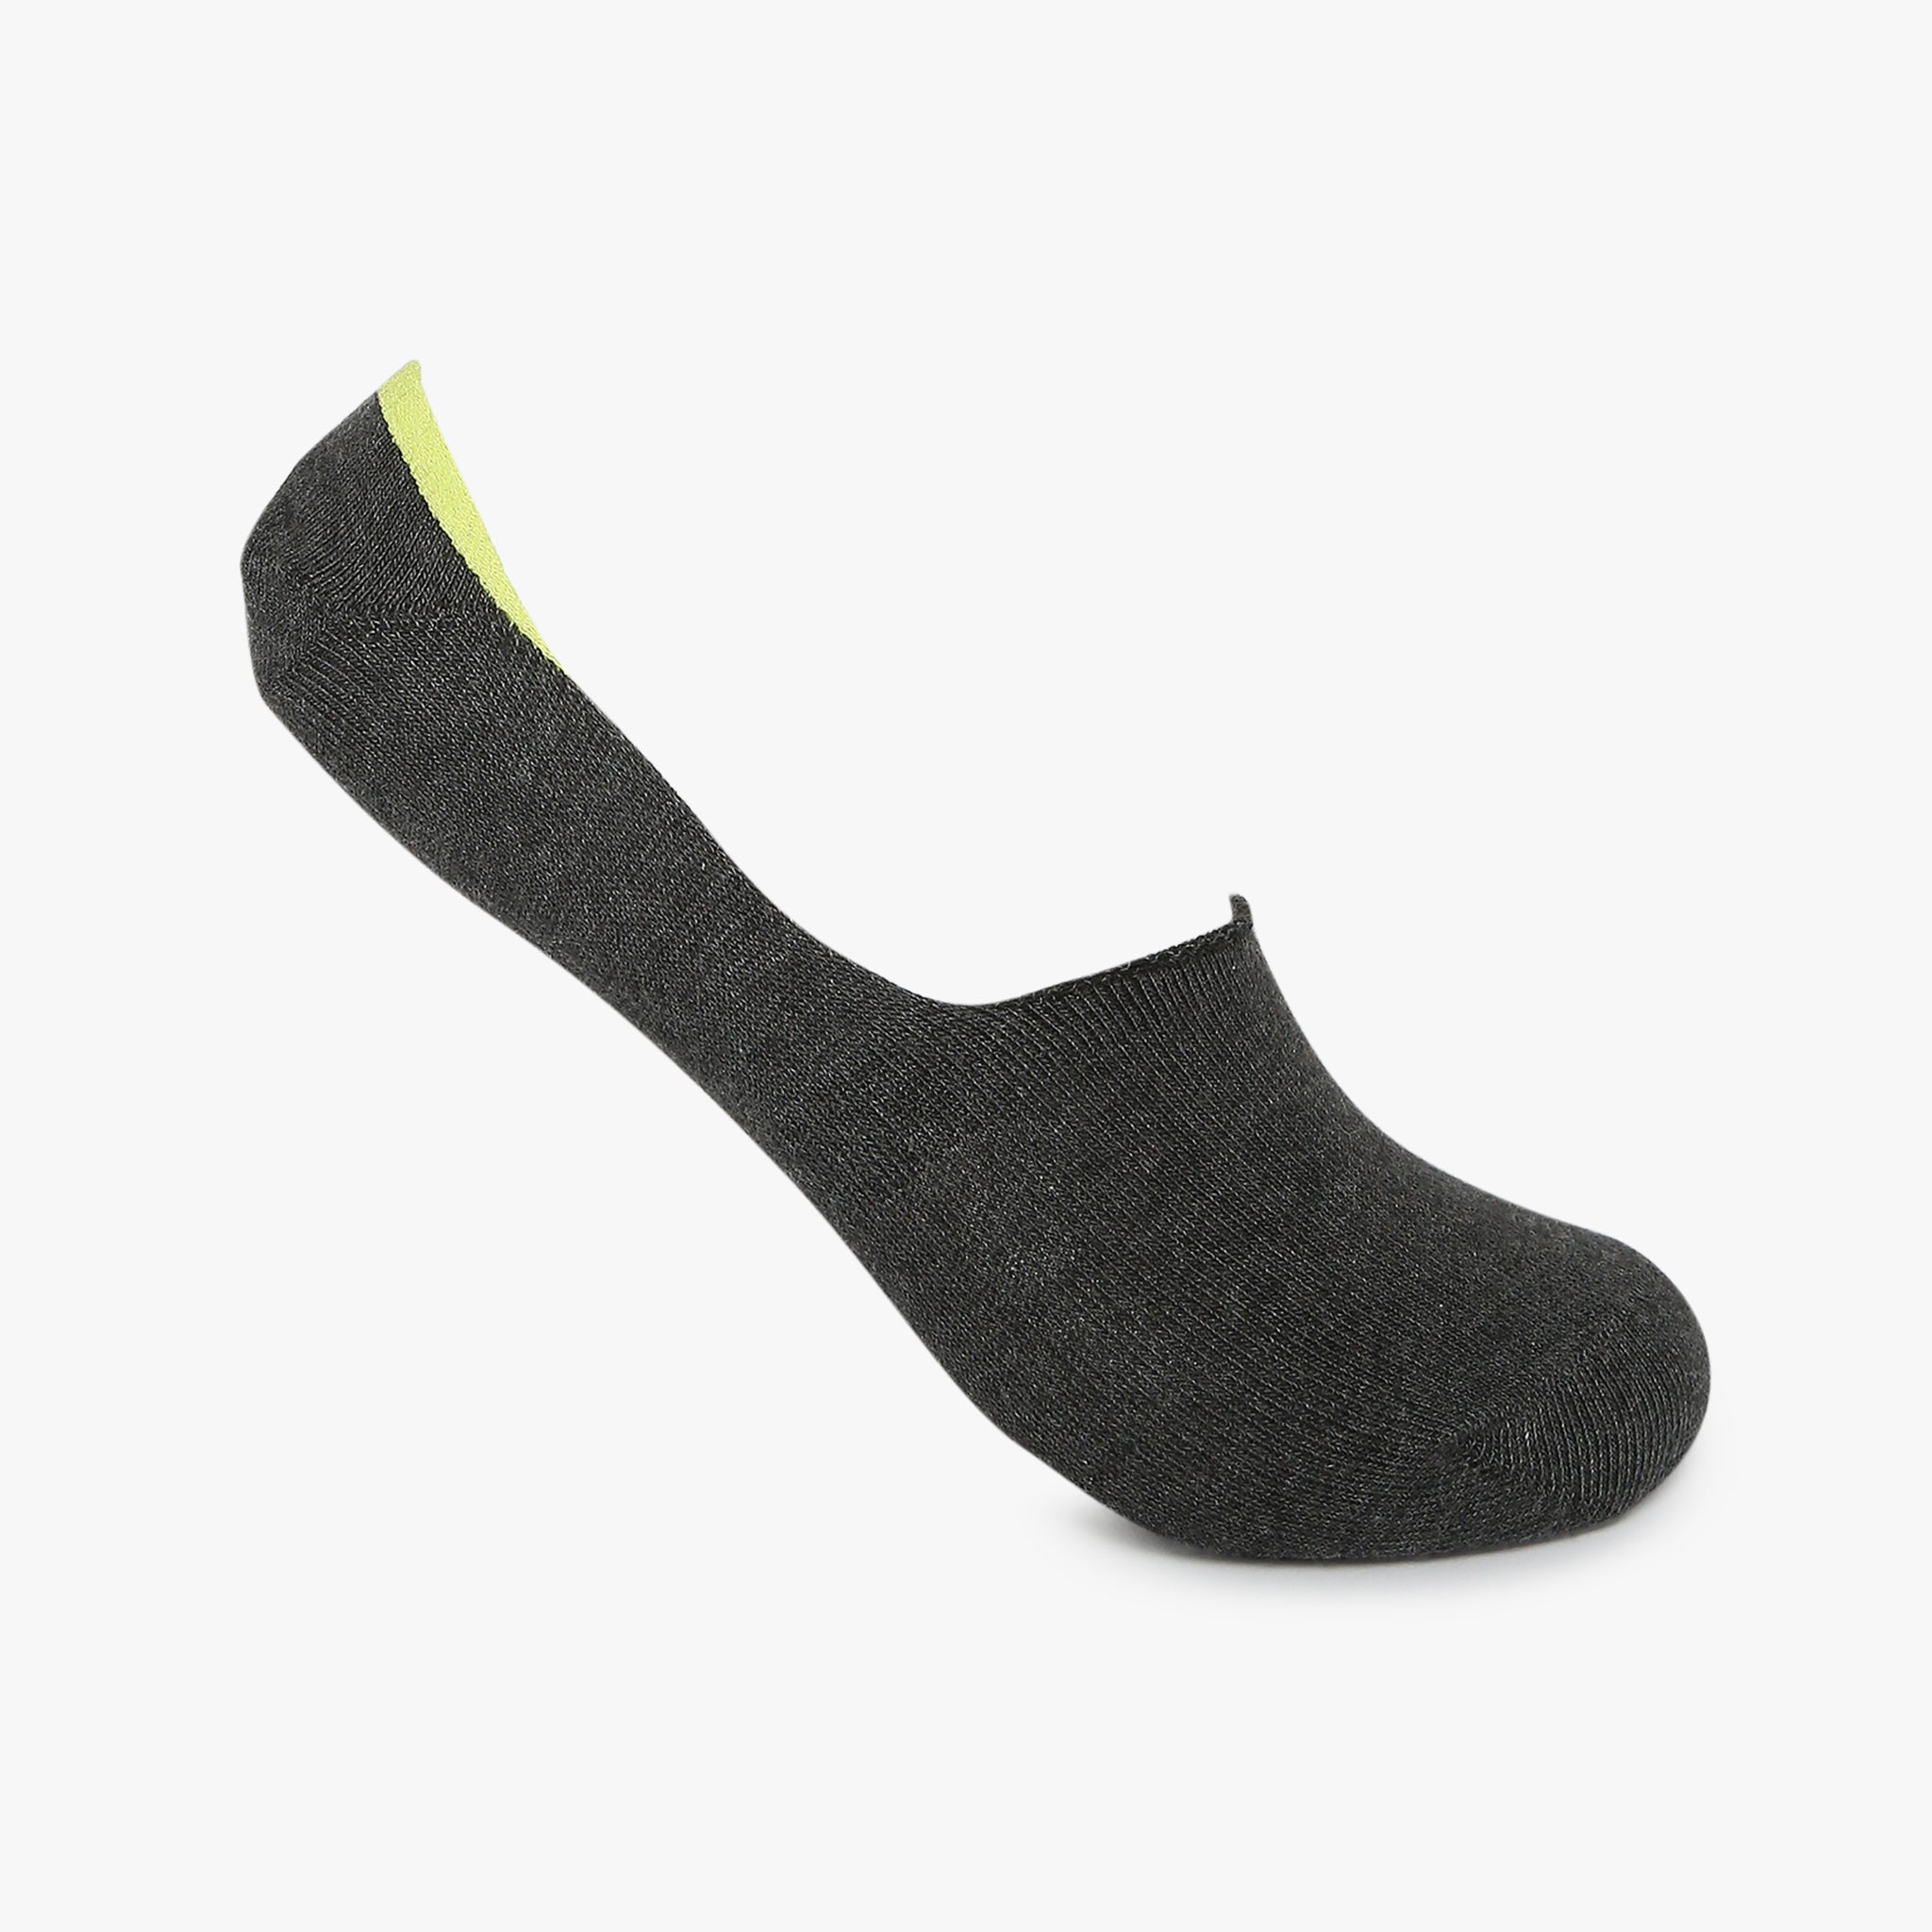 Womens Cotton Polyester Ankle Length Socks